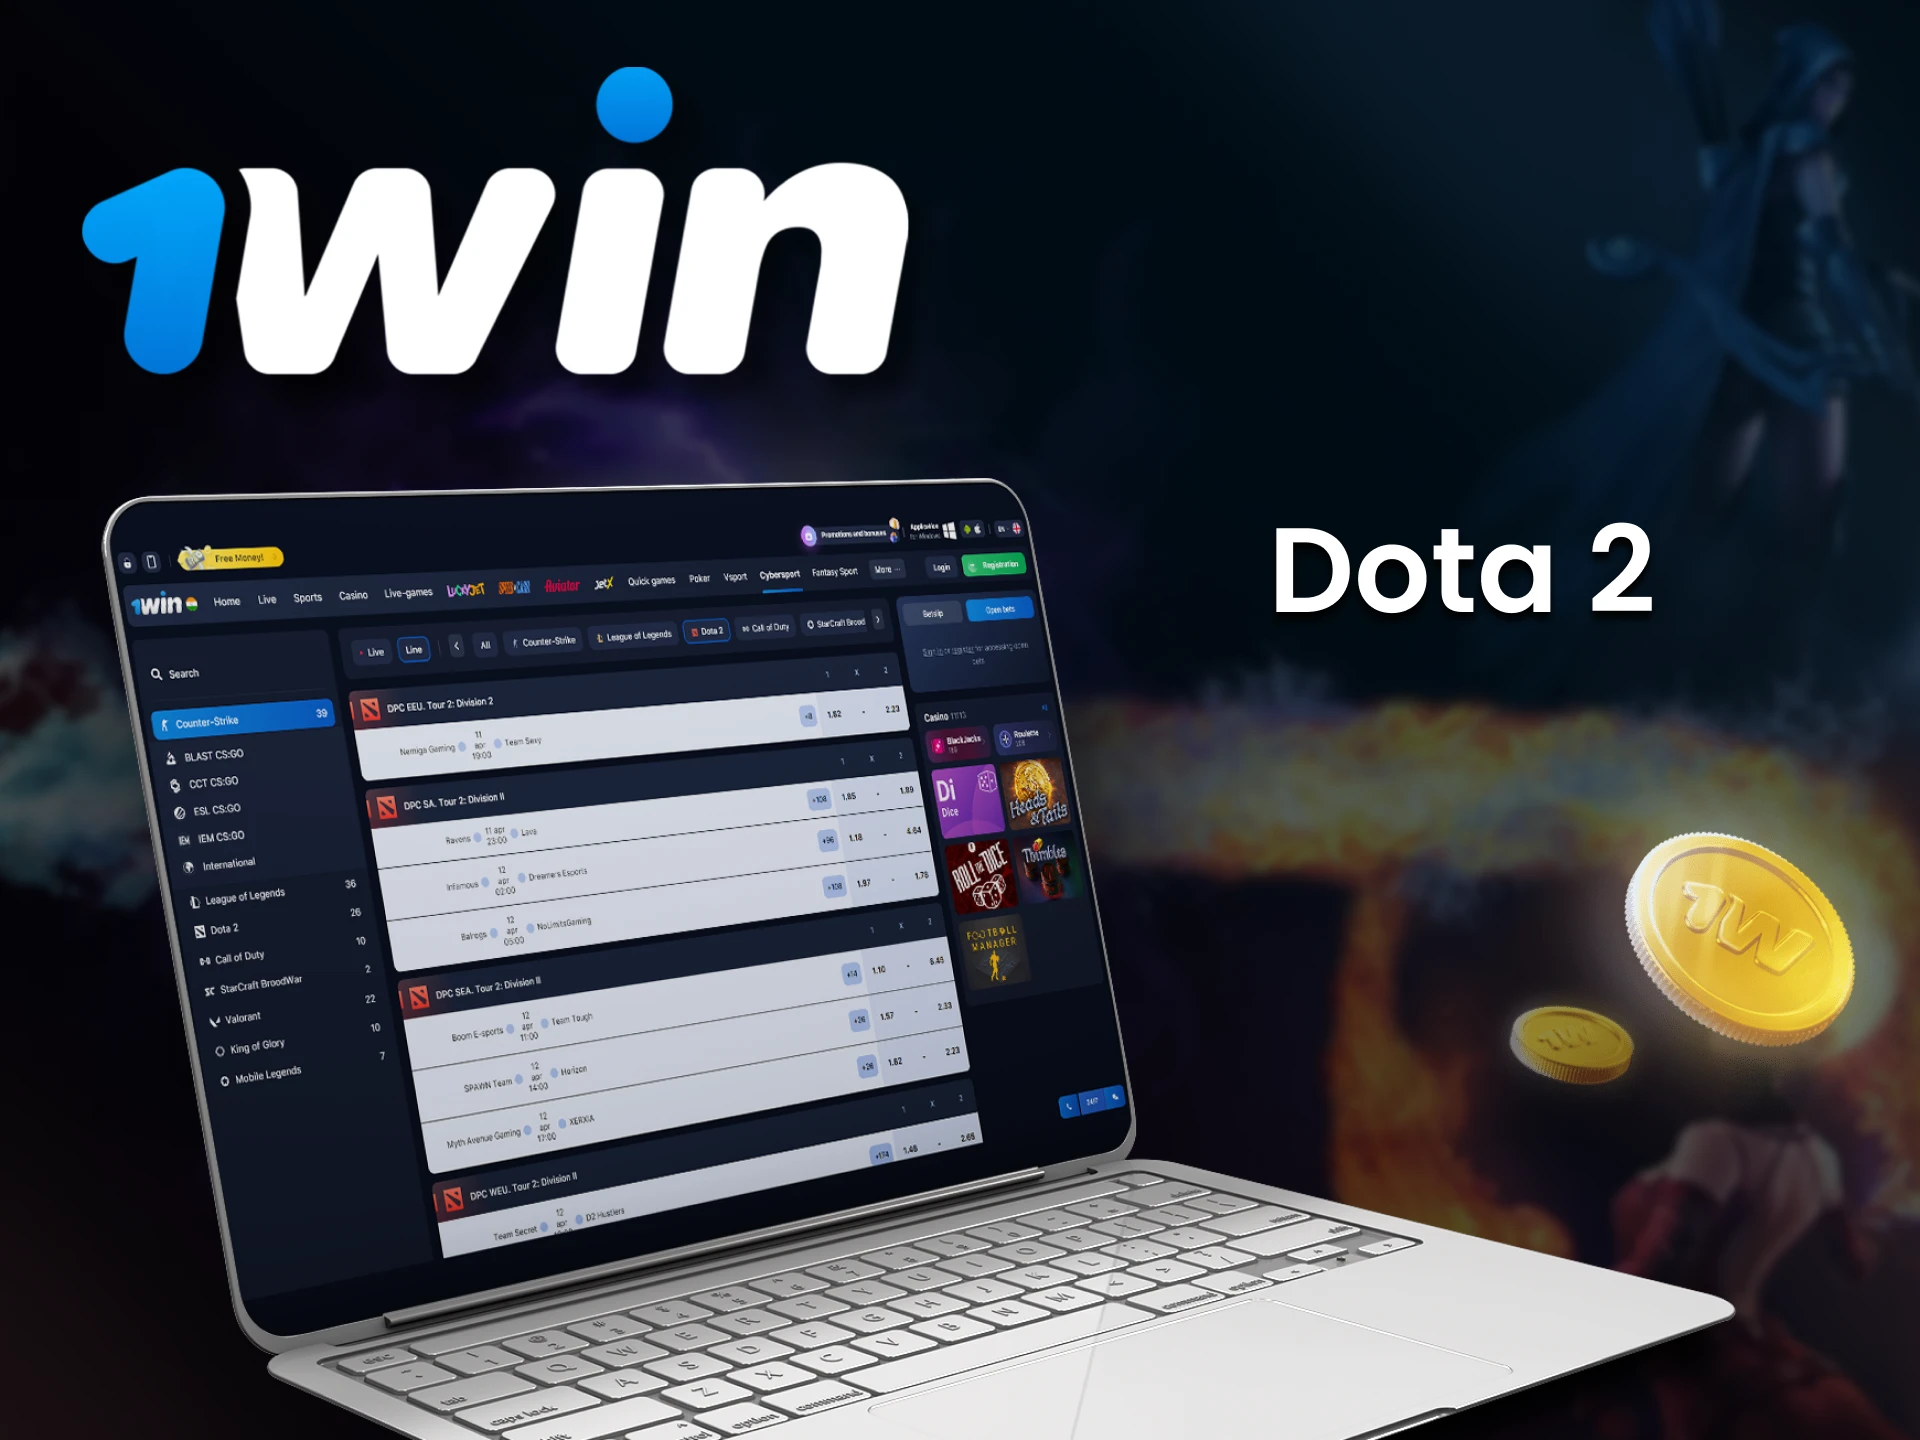 For eSports betting, choose Dota 2 from 1win.